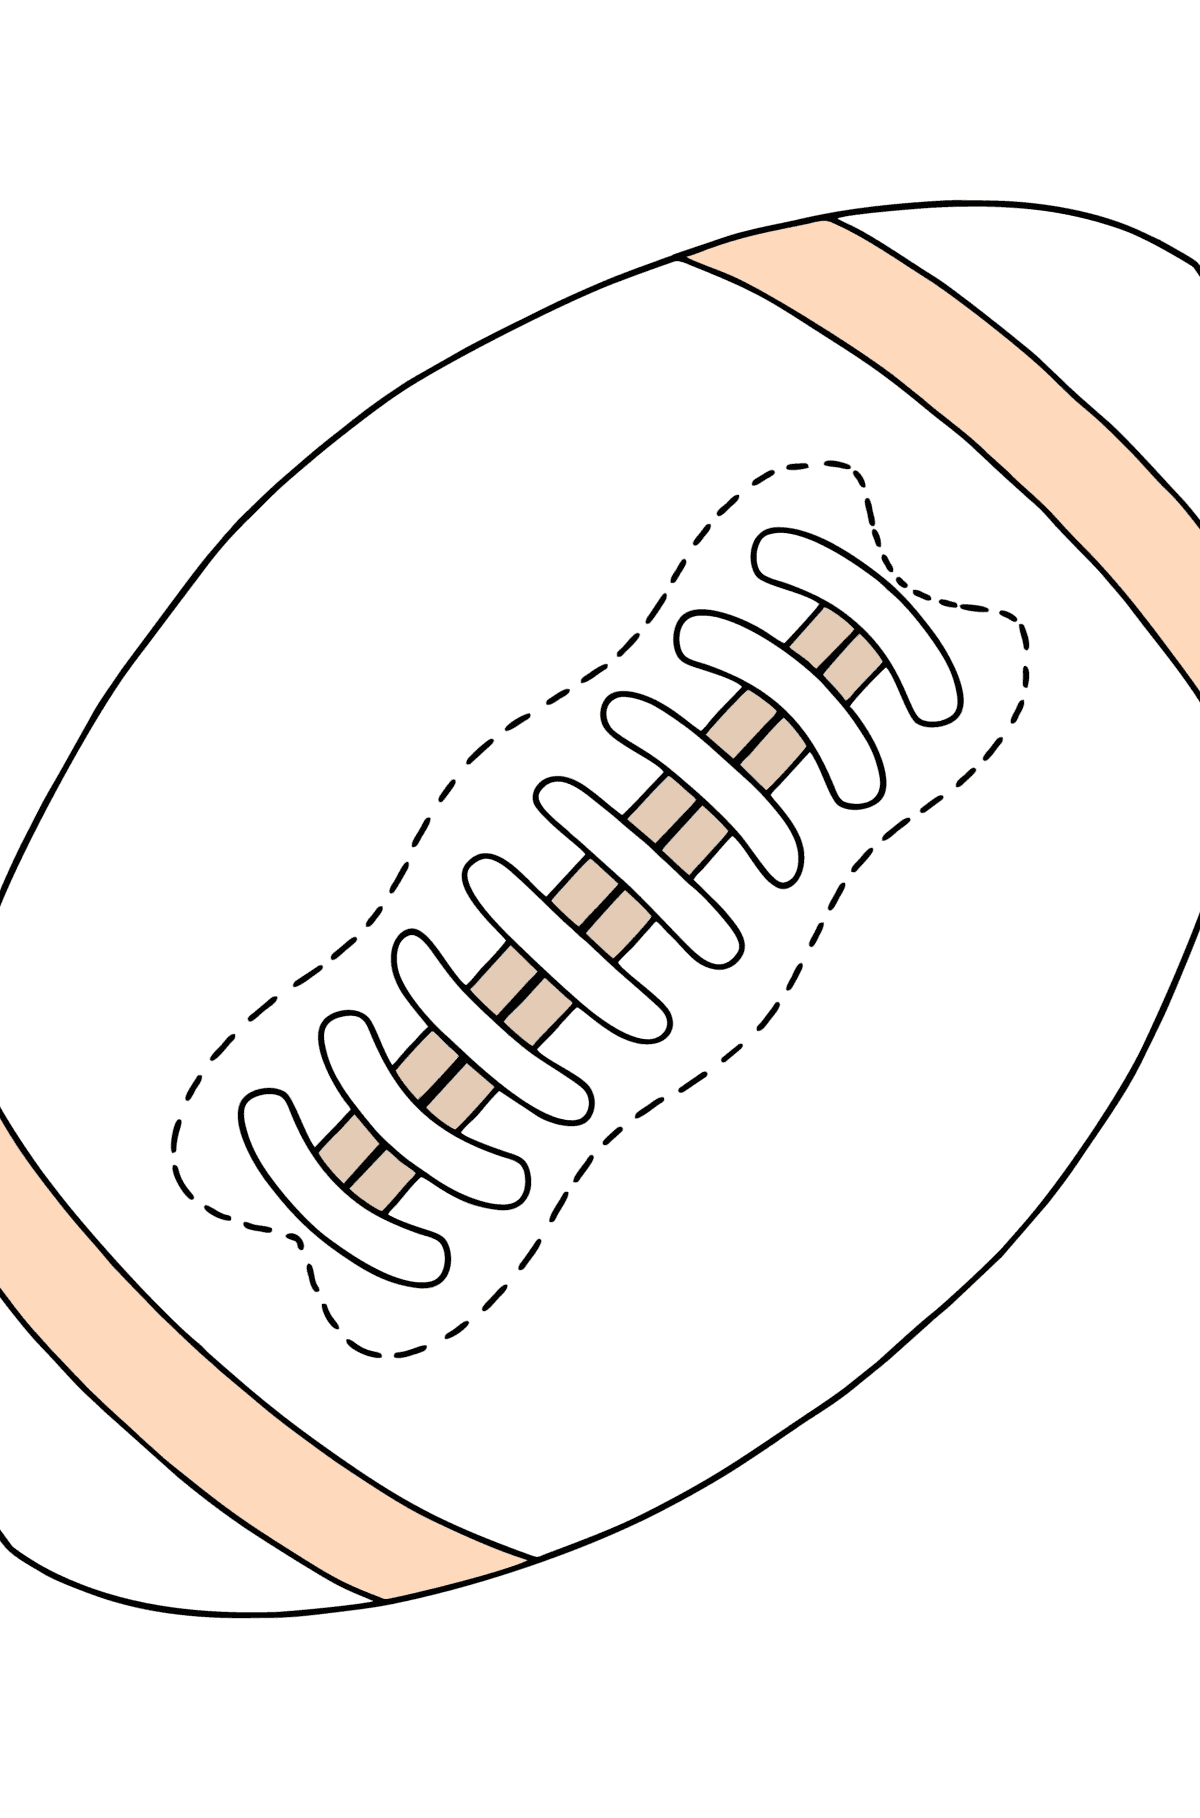 NFL Ball сoloring page - Coloring Pages for Kids